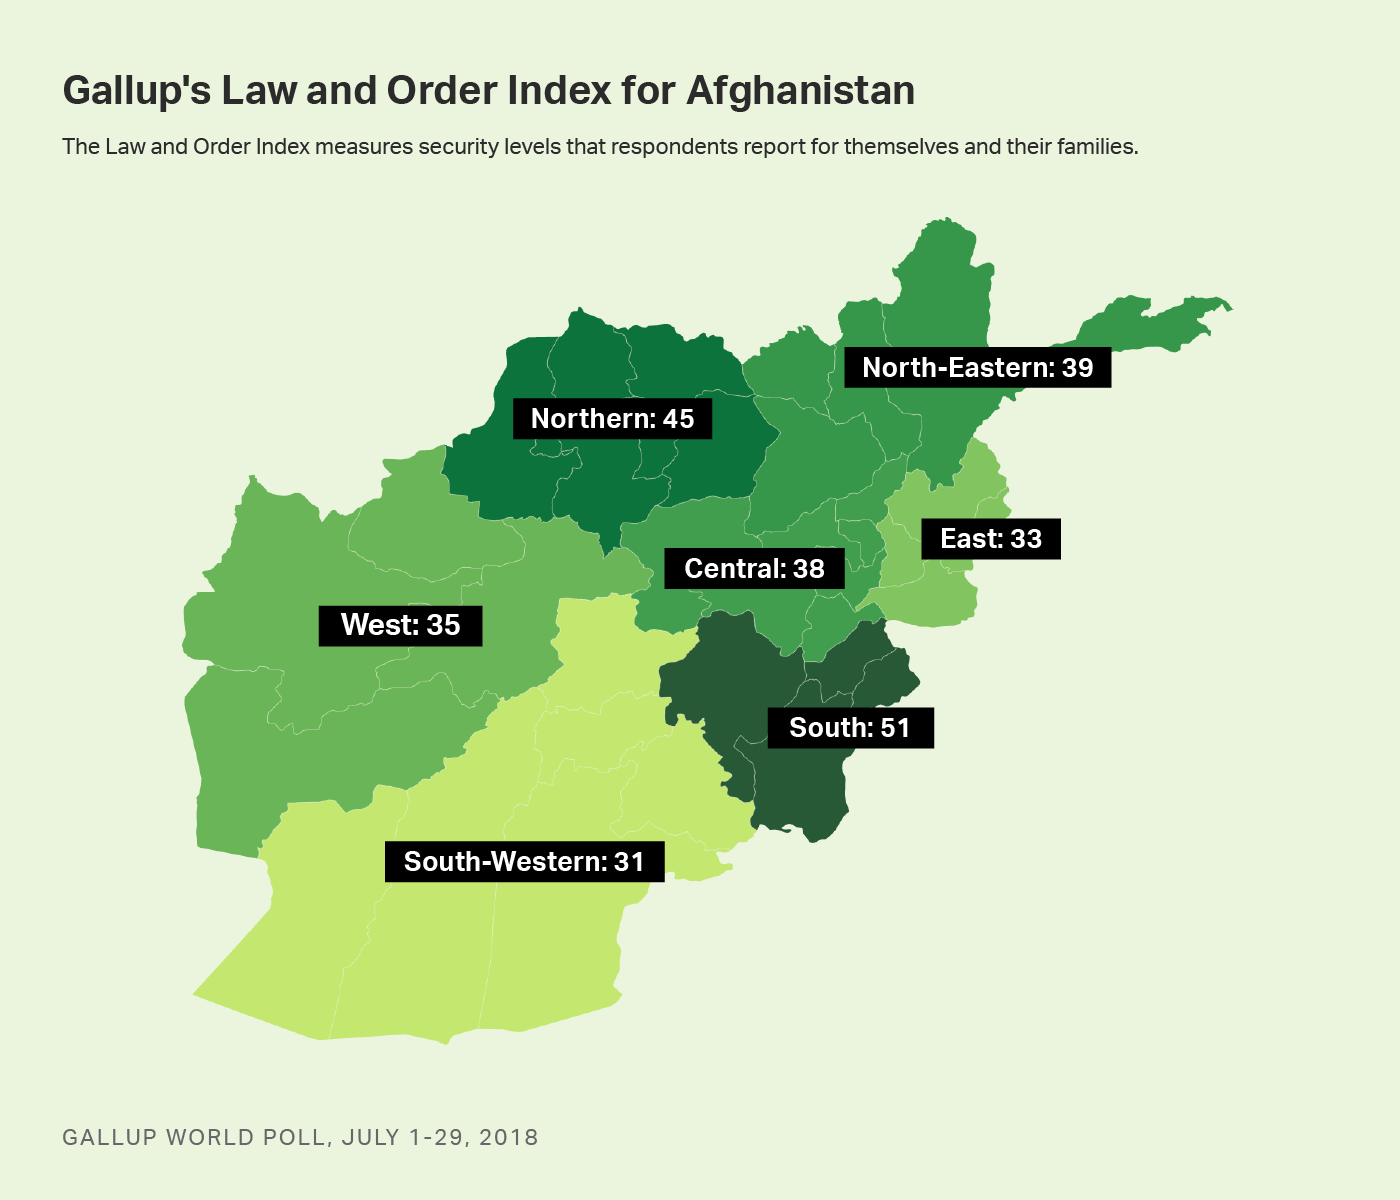 Law and Order Index scores in Afghanistan by region.